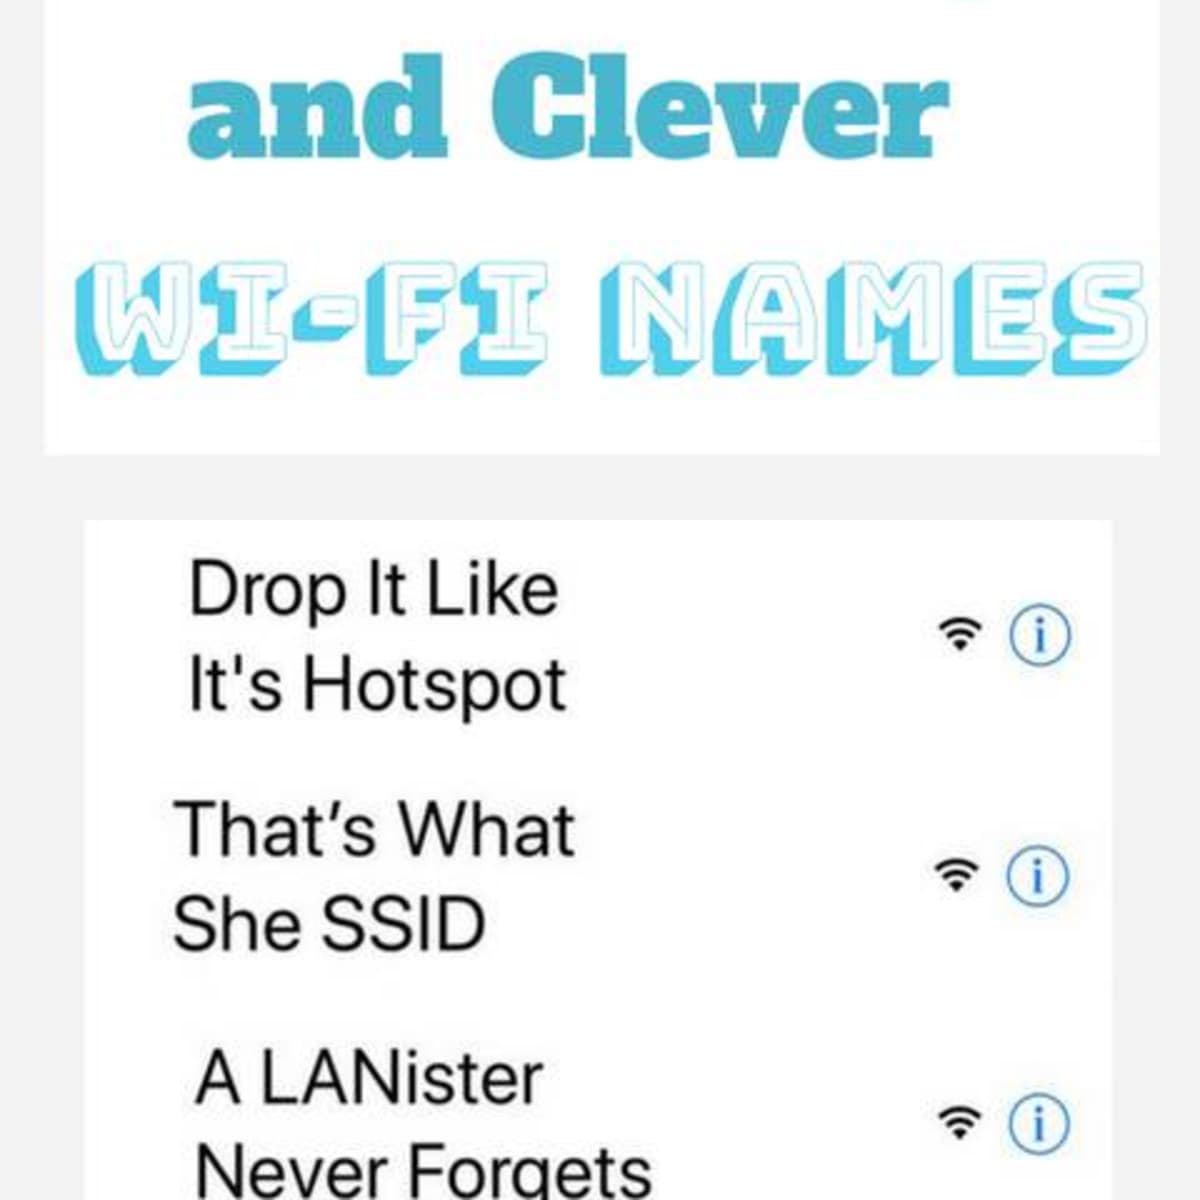 Persuasive fiction professional A Complete List of Funny, Clever, and Cool Wi-Fi Names - TurboFuture